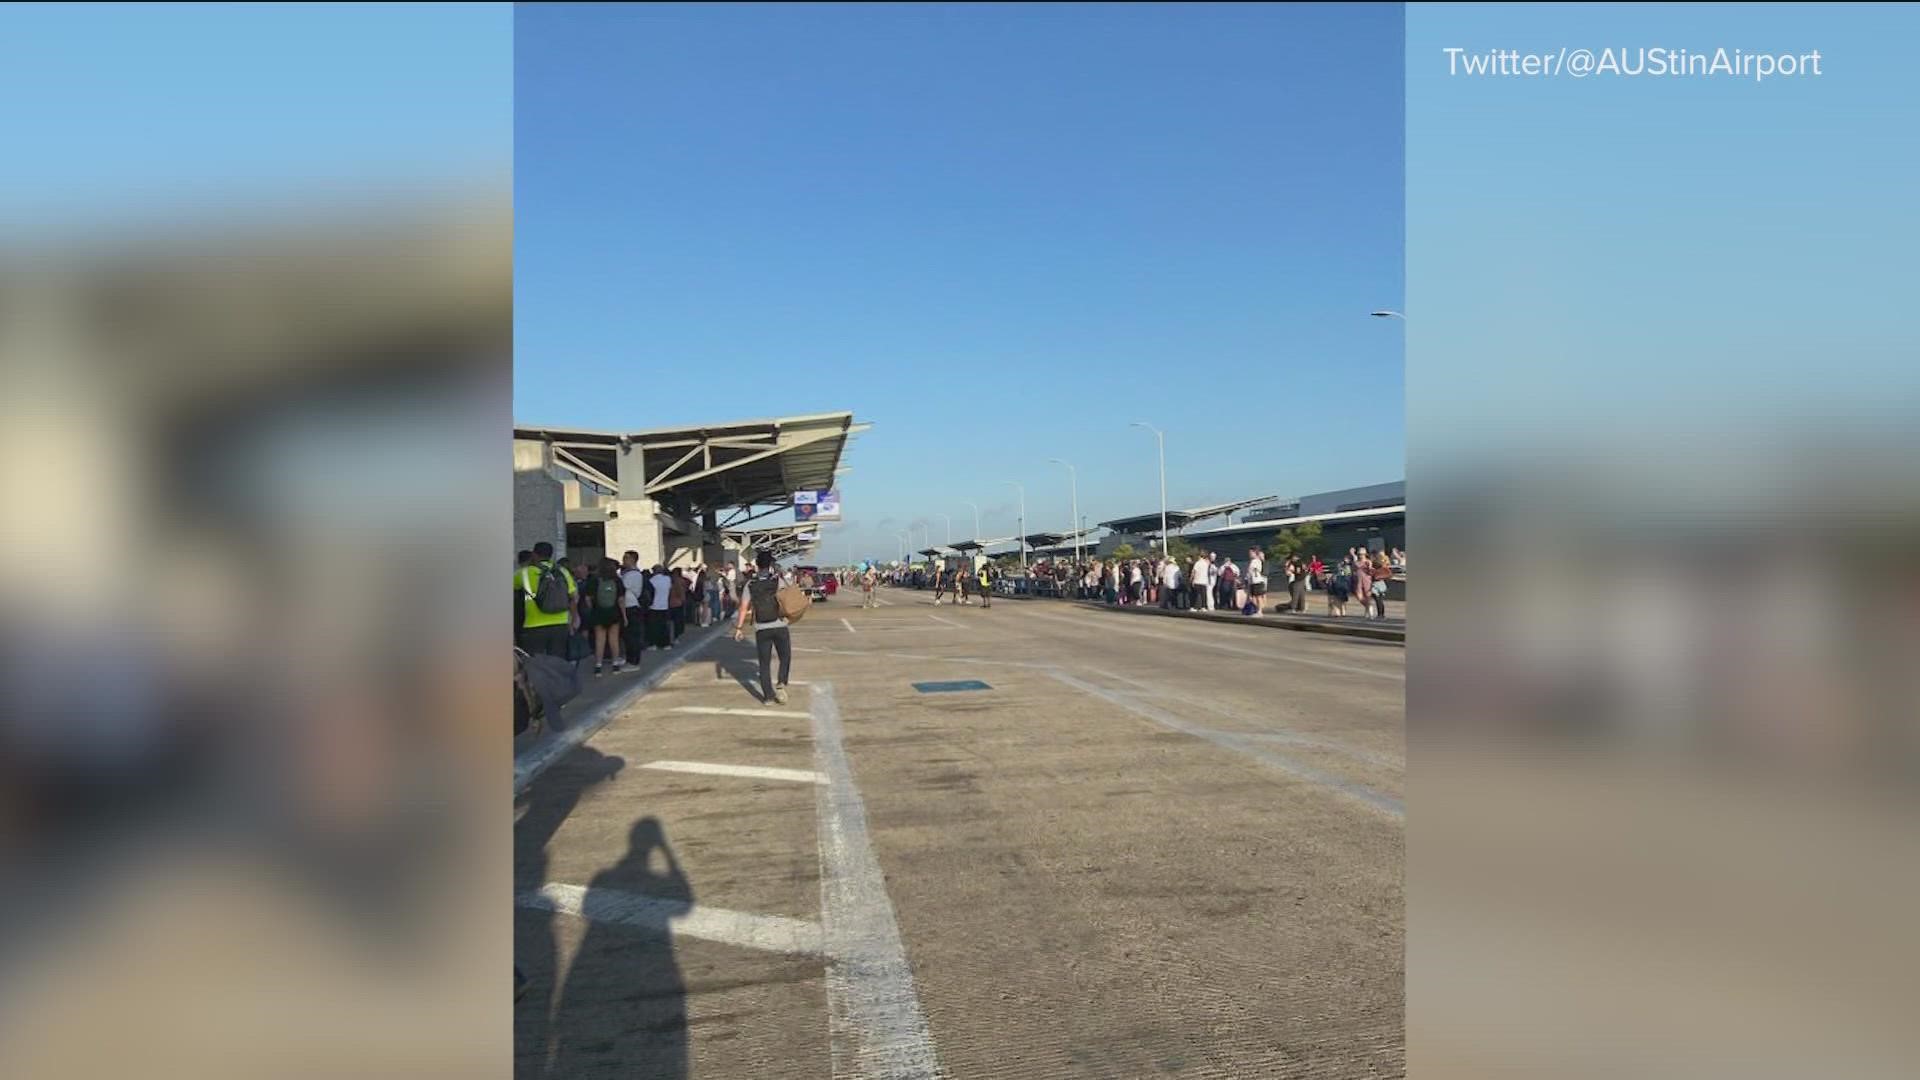 Passengers at Austin's airport had to go through security a second time Wednesday morning after a fire alarm led to an evacuation.